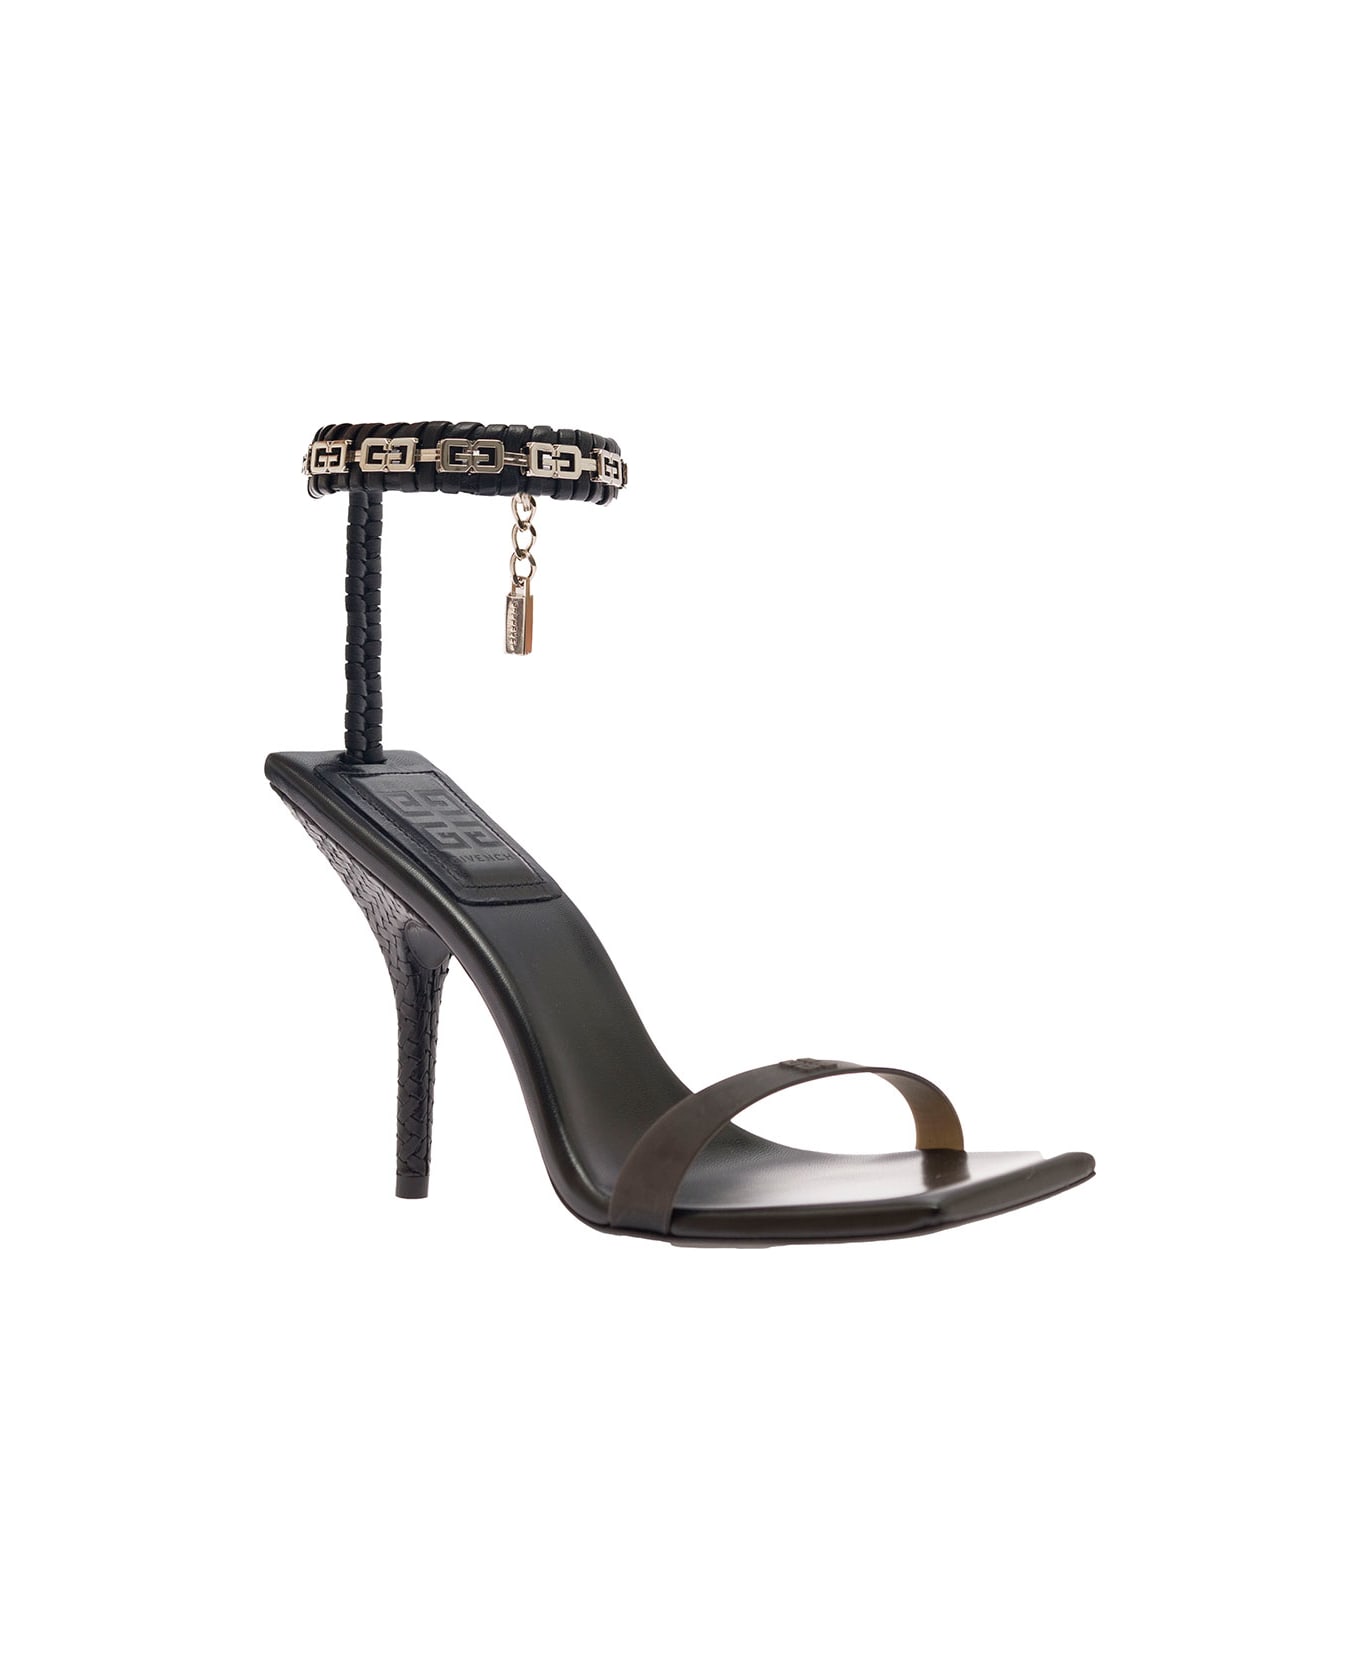 Givenchy Sandals With Embossed 4g Logo And Chain In Leather - Black サンダル